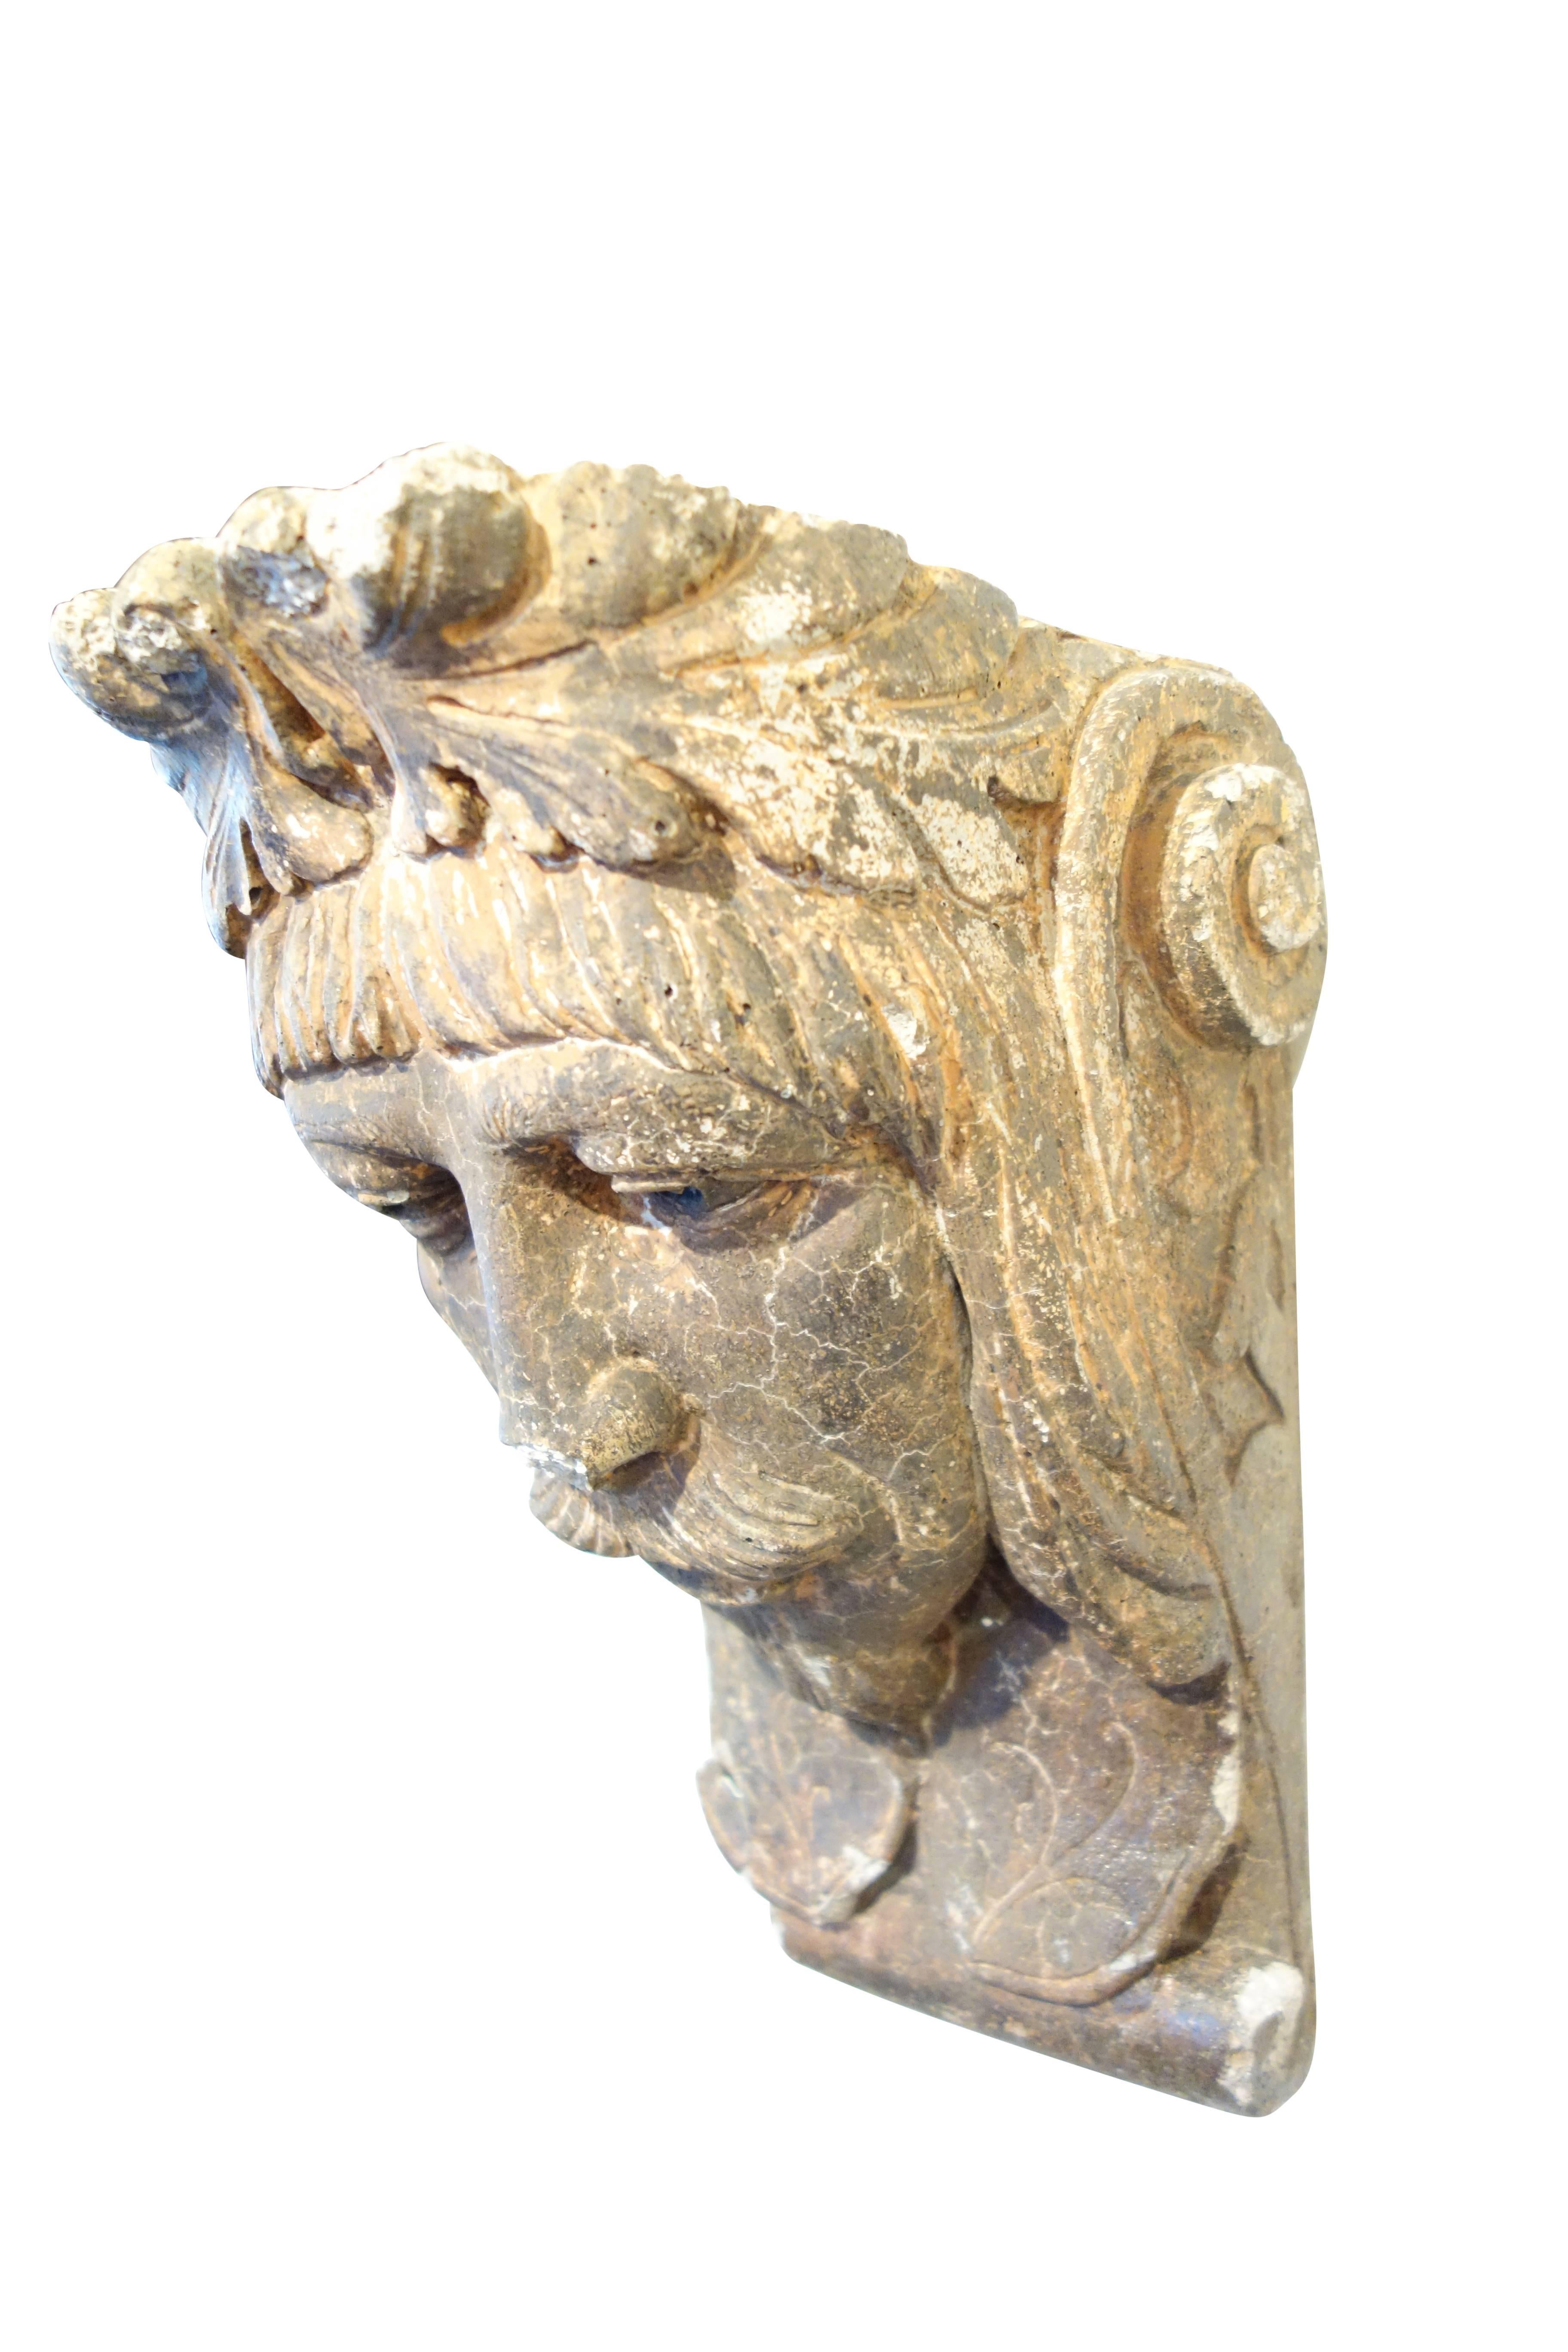 This is a hauntingly beautiful pair of plaster corbels in the form of a man and woman's face. The female resembles a gypsy, wearing a headscarf with a leaf pendant on her forehead. The male is sporting a mustache, goatee, and nicely trimmed bangs.